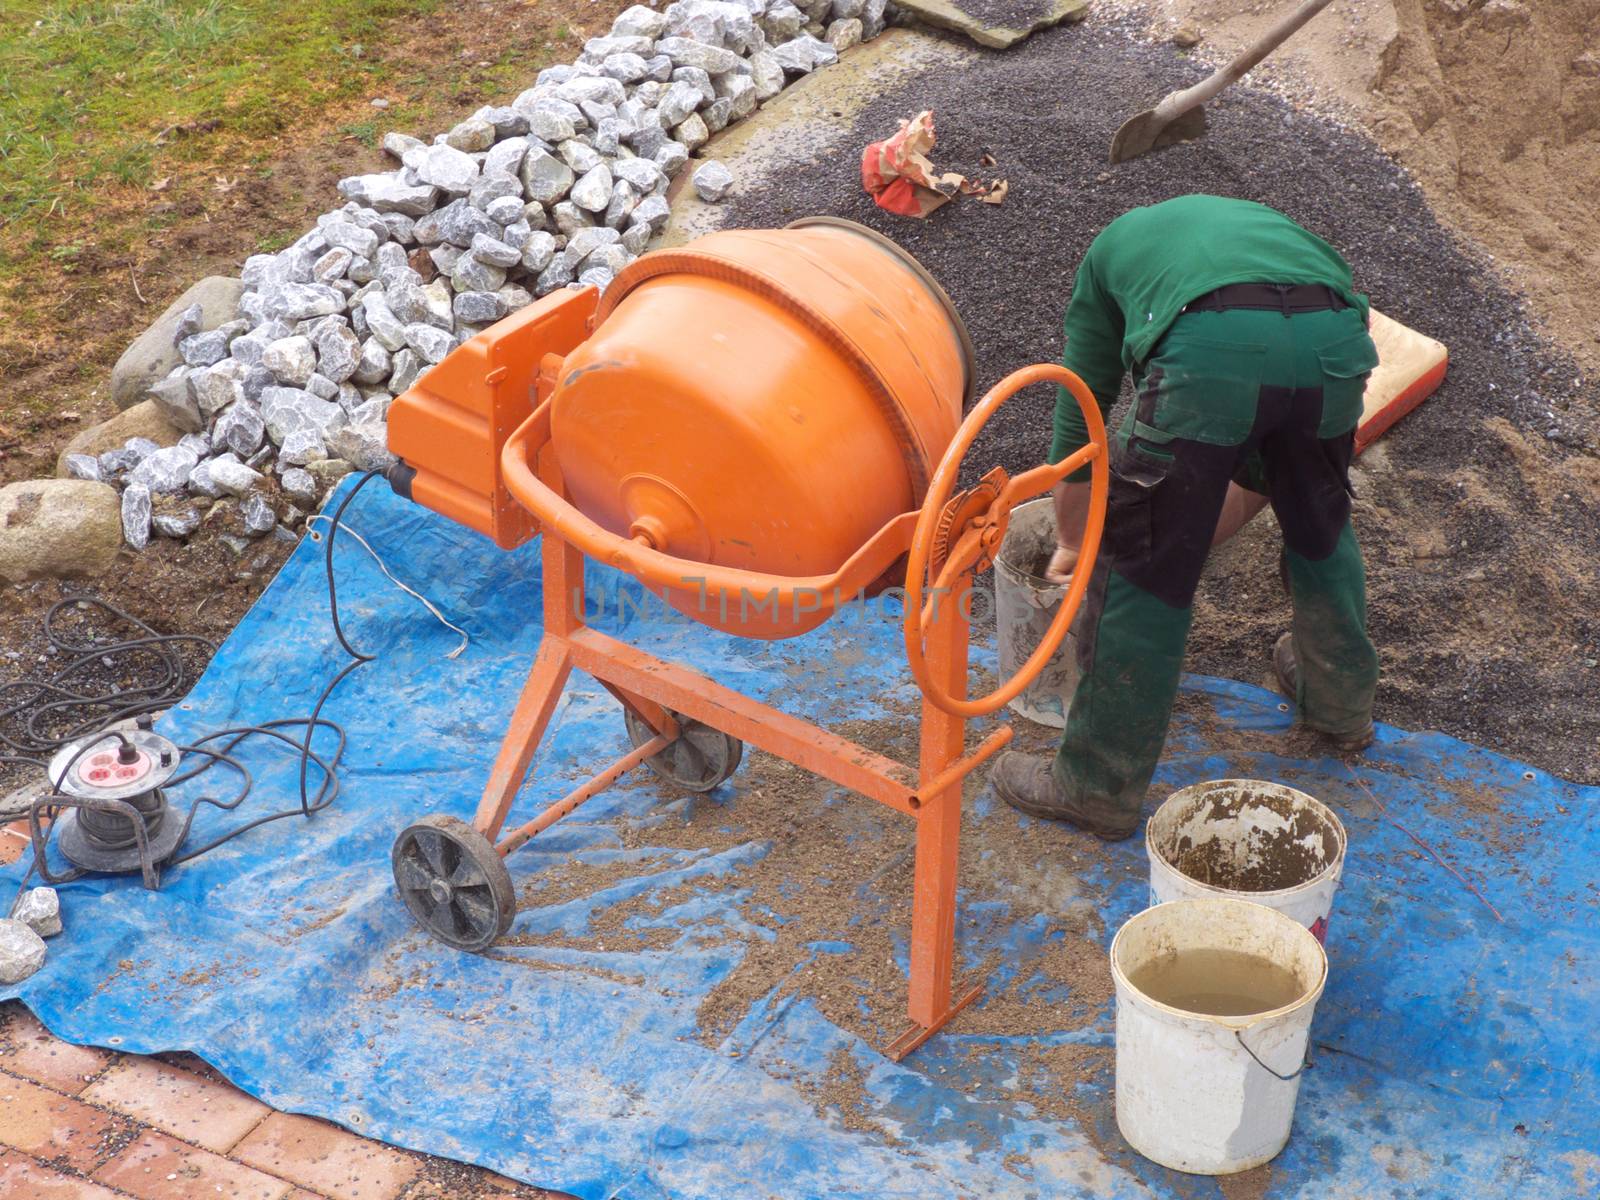 Concrete mixers in use by JFsPic